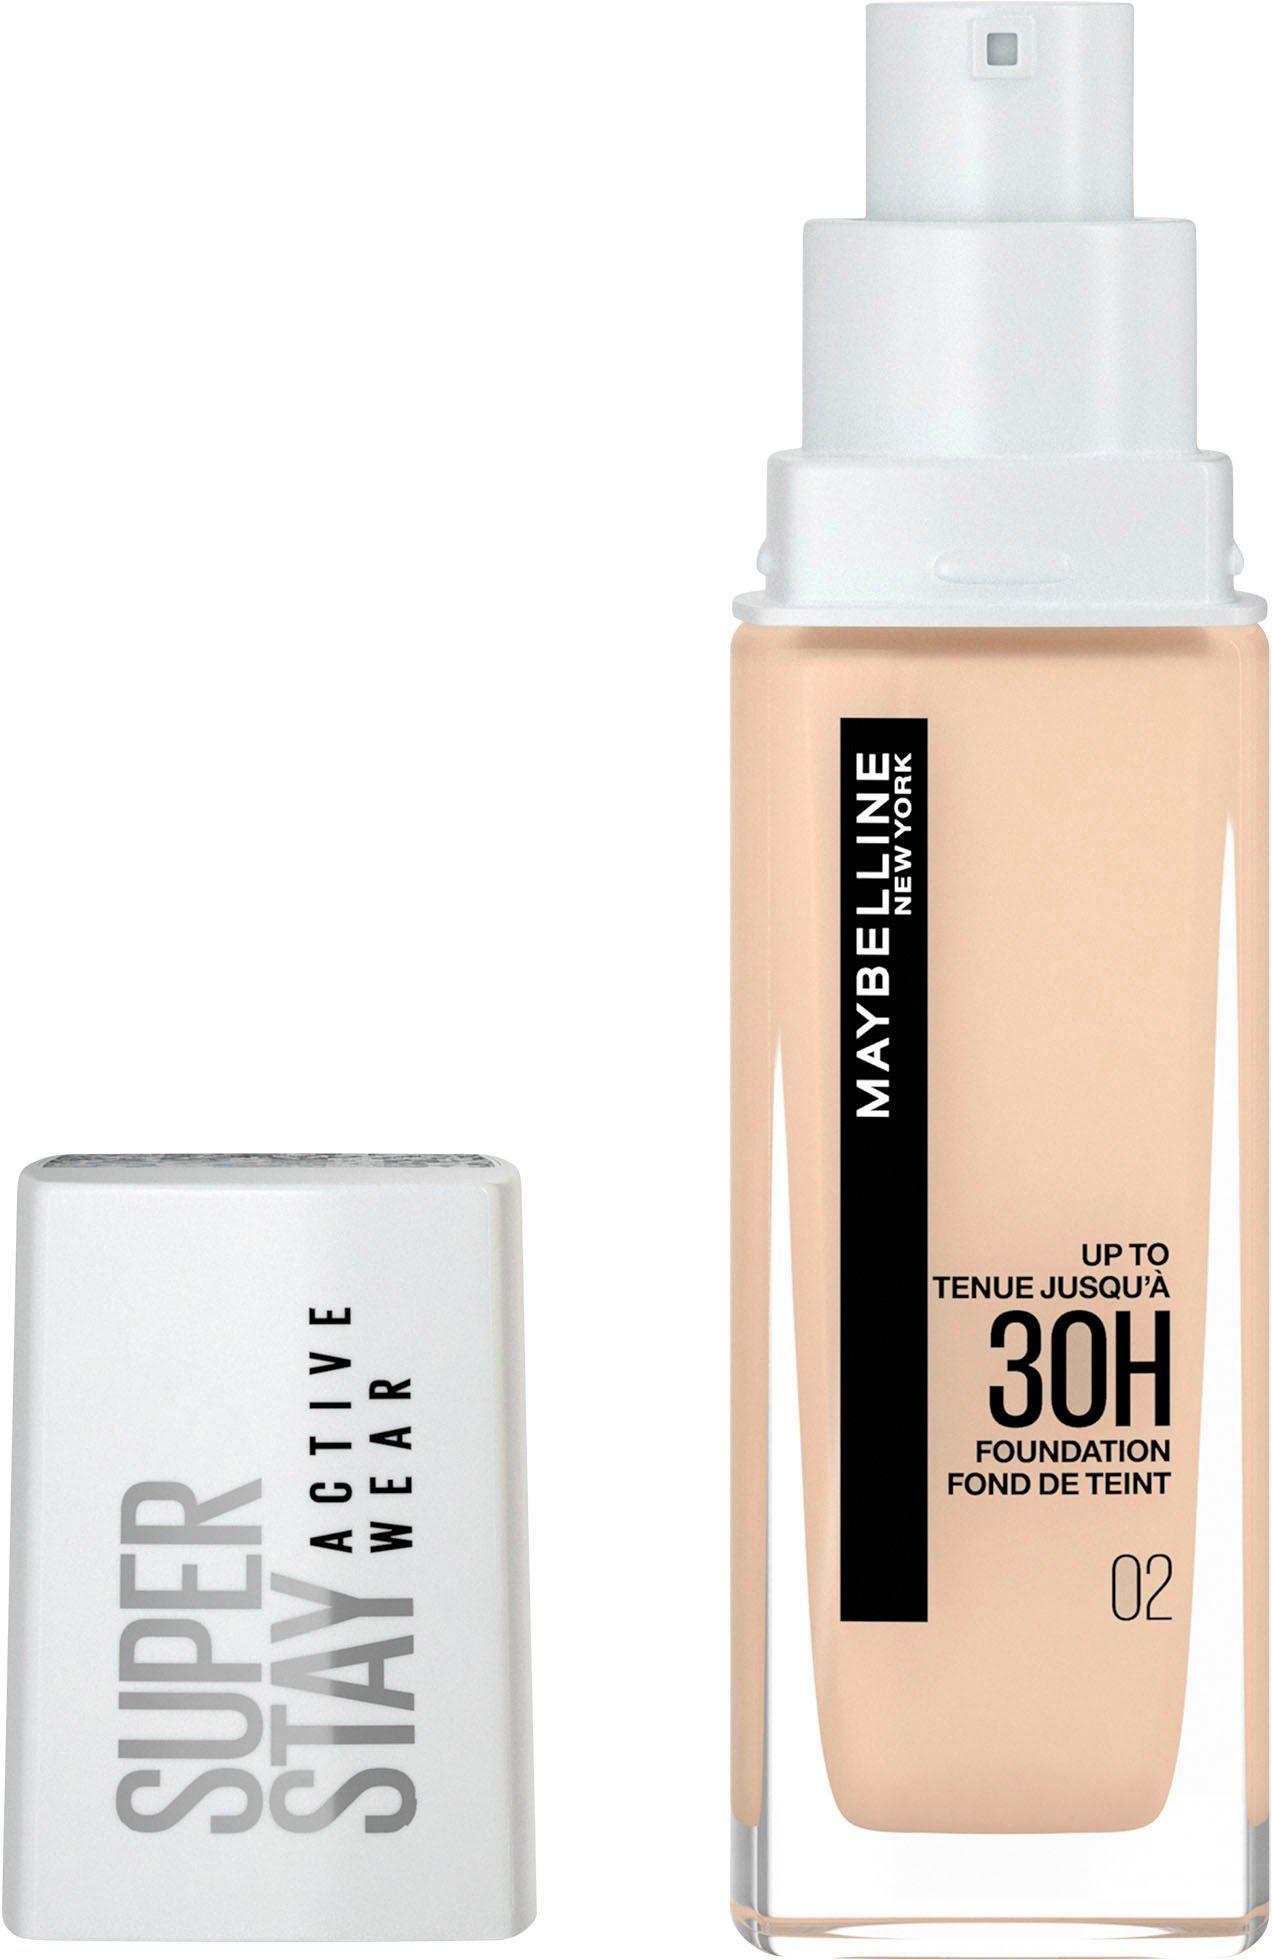 Active Super Naked NEW 2 Stay YORK MAYBELLINE Foundation Ivory Wear